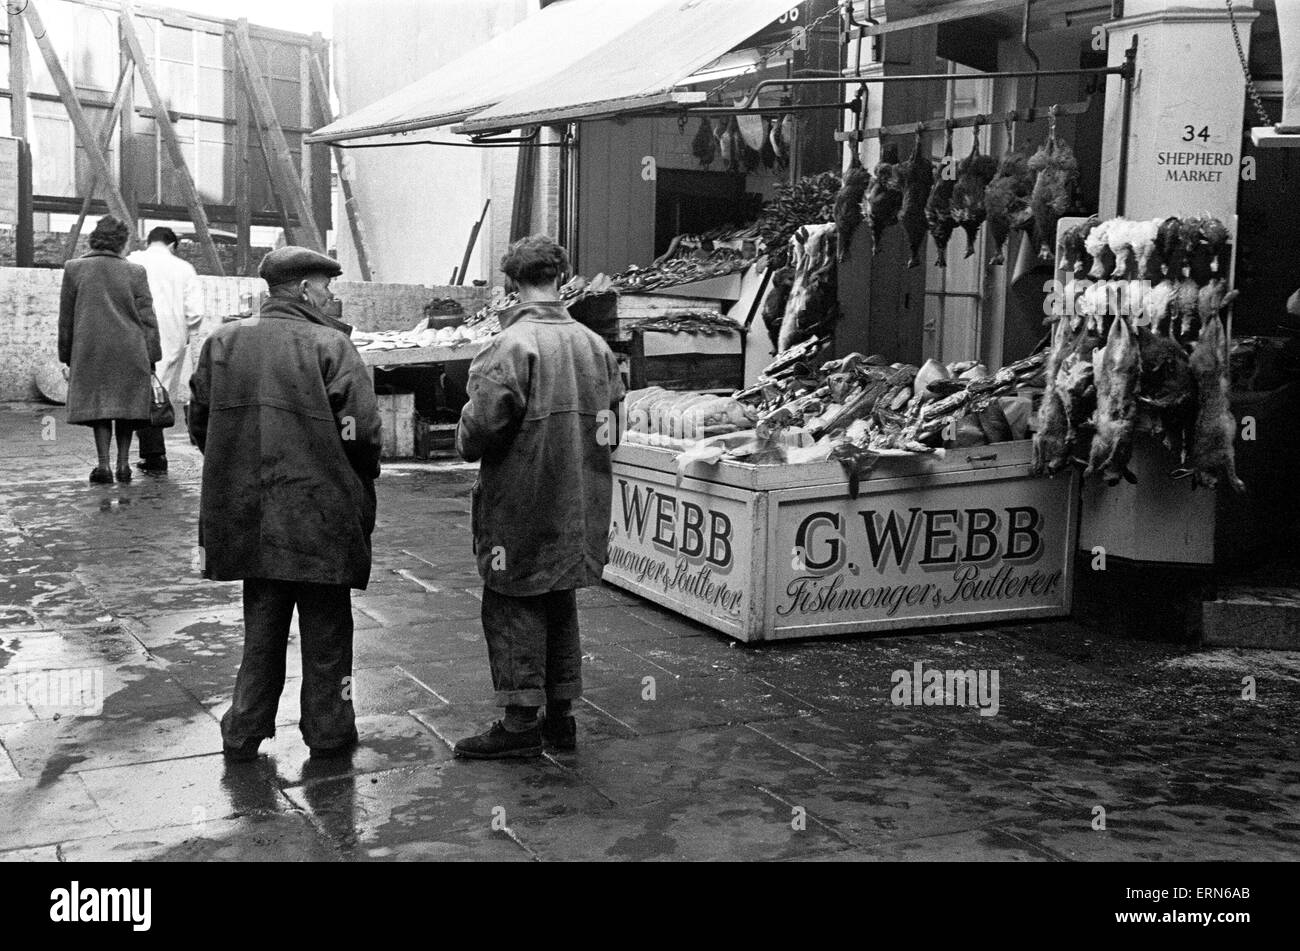 A Day in the life of Shepherd's Bush Market, 1948 Stock Photo